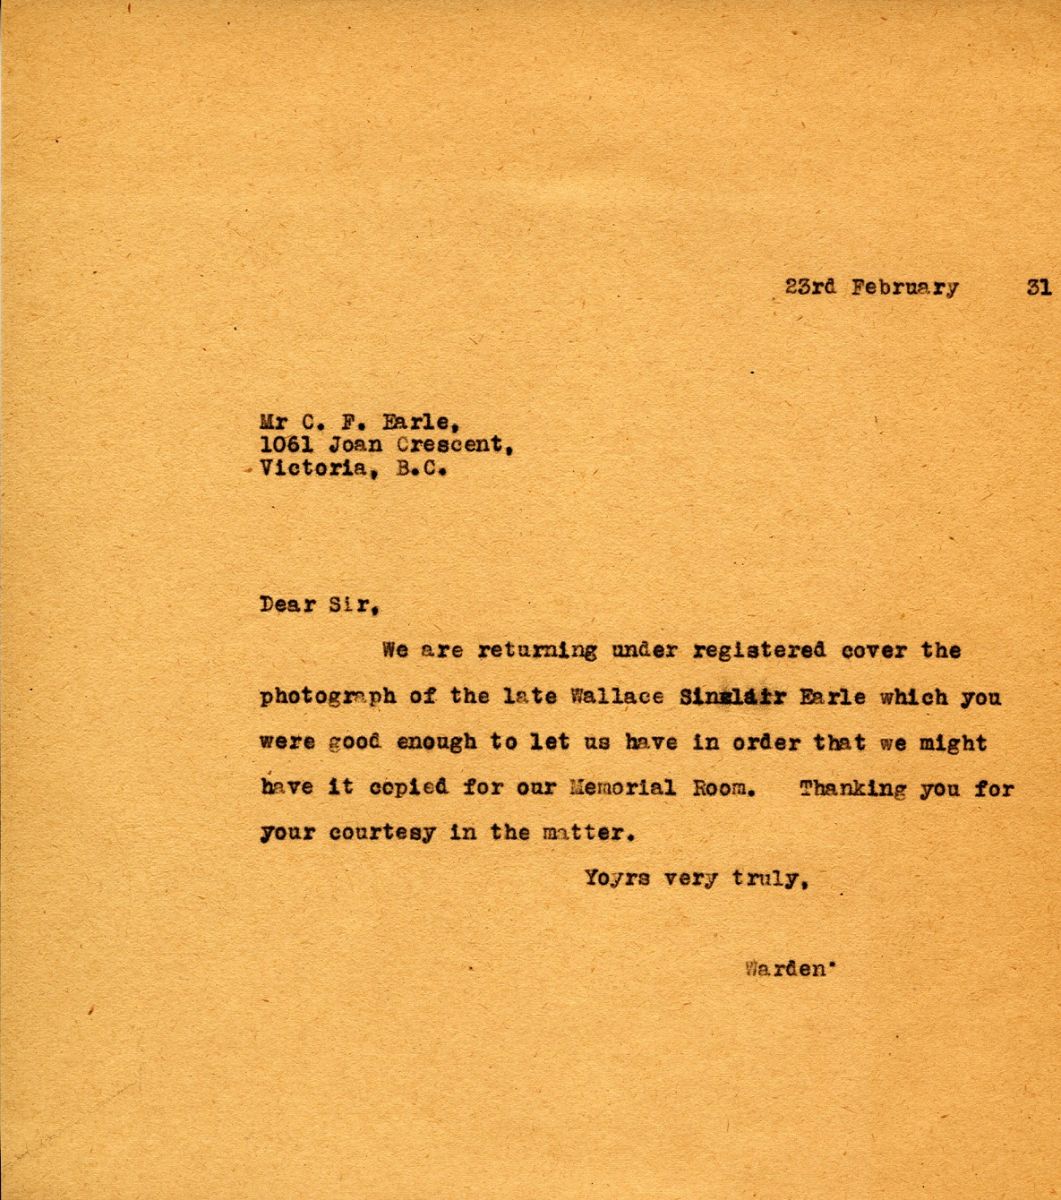 Letter from the Warden to Mr. C.F. Earle, 23rd February 1931